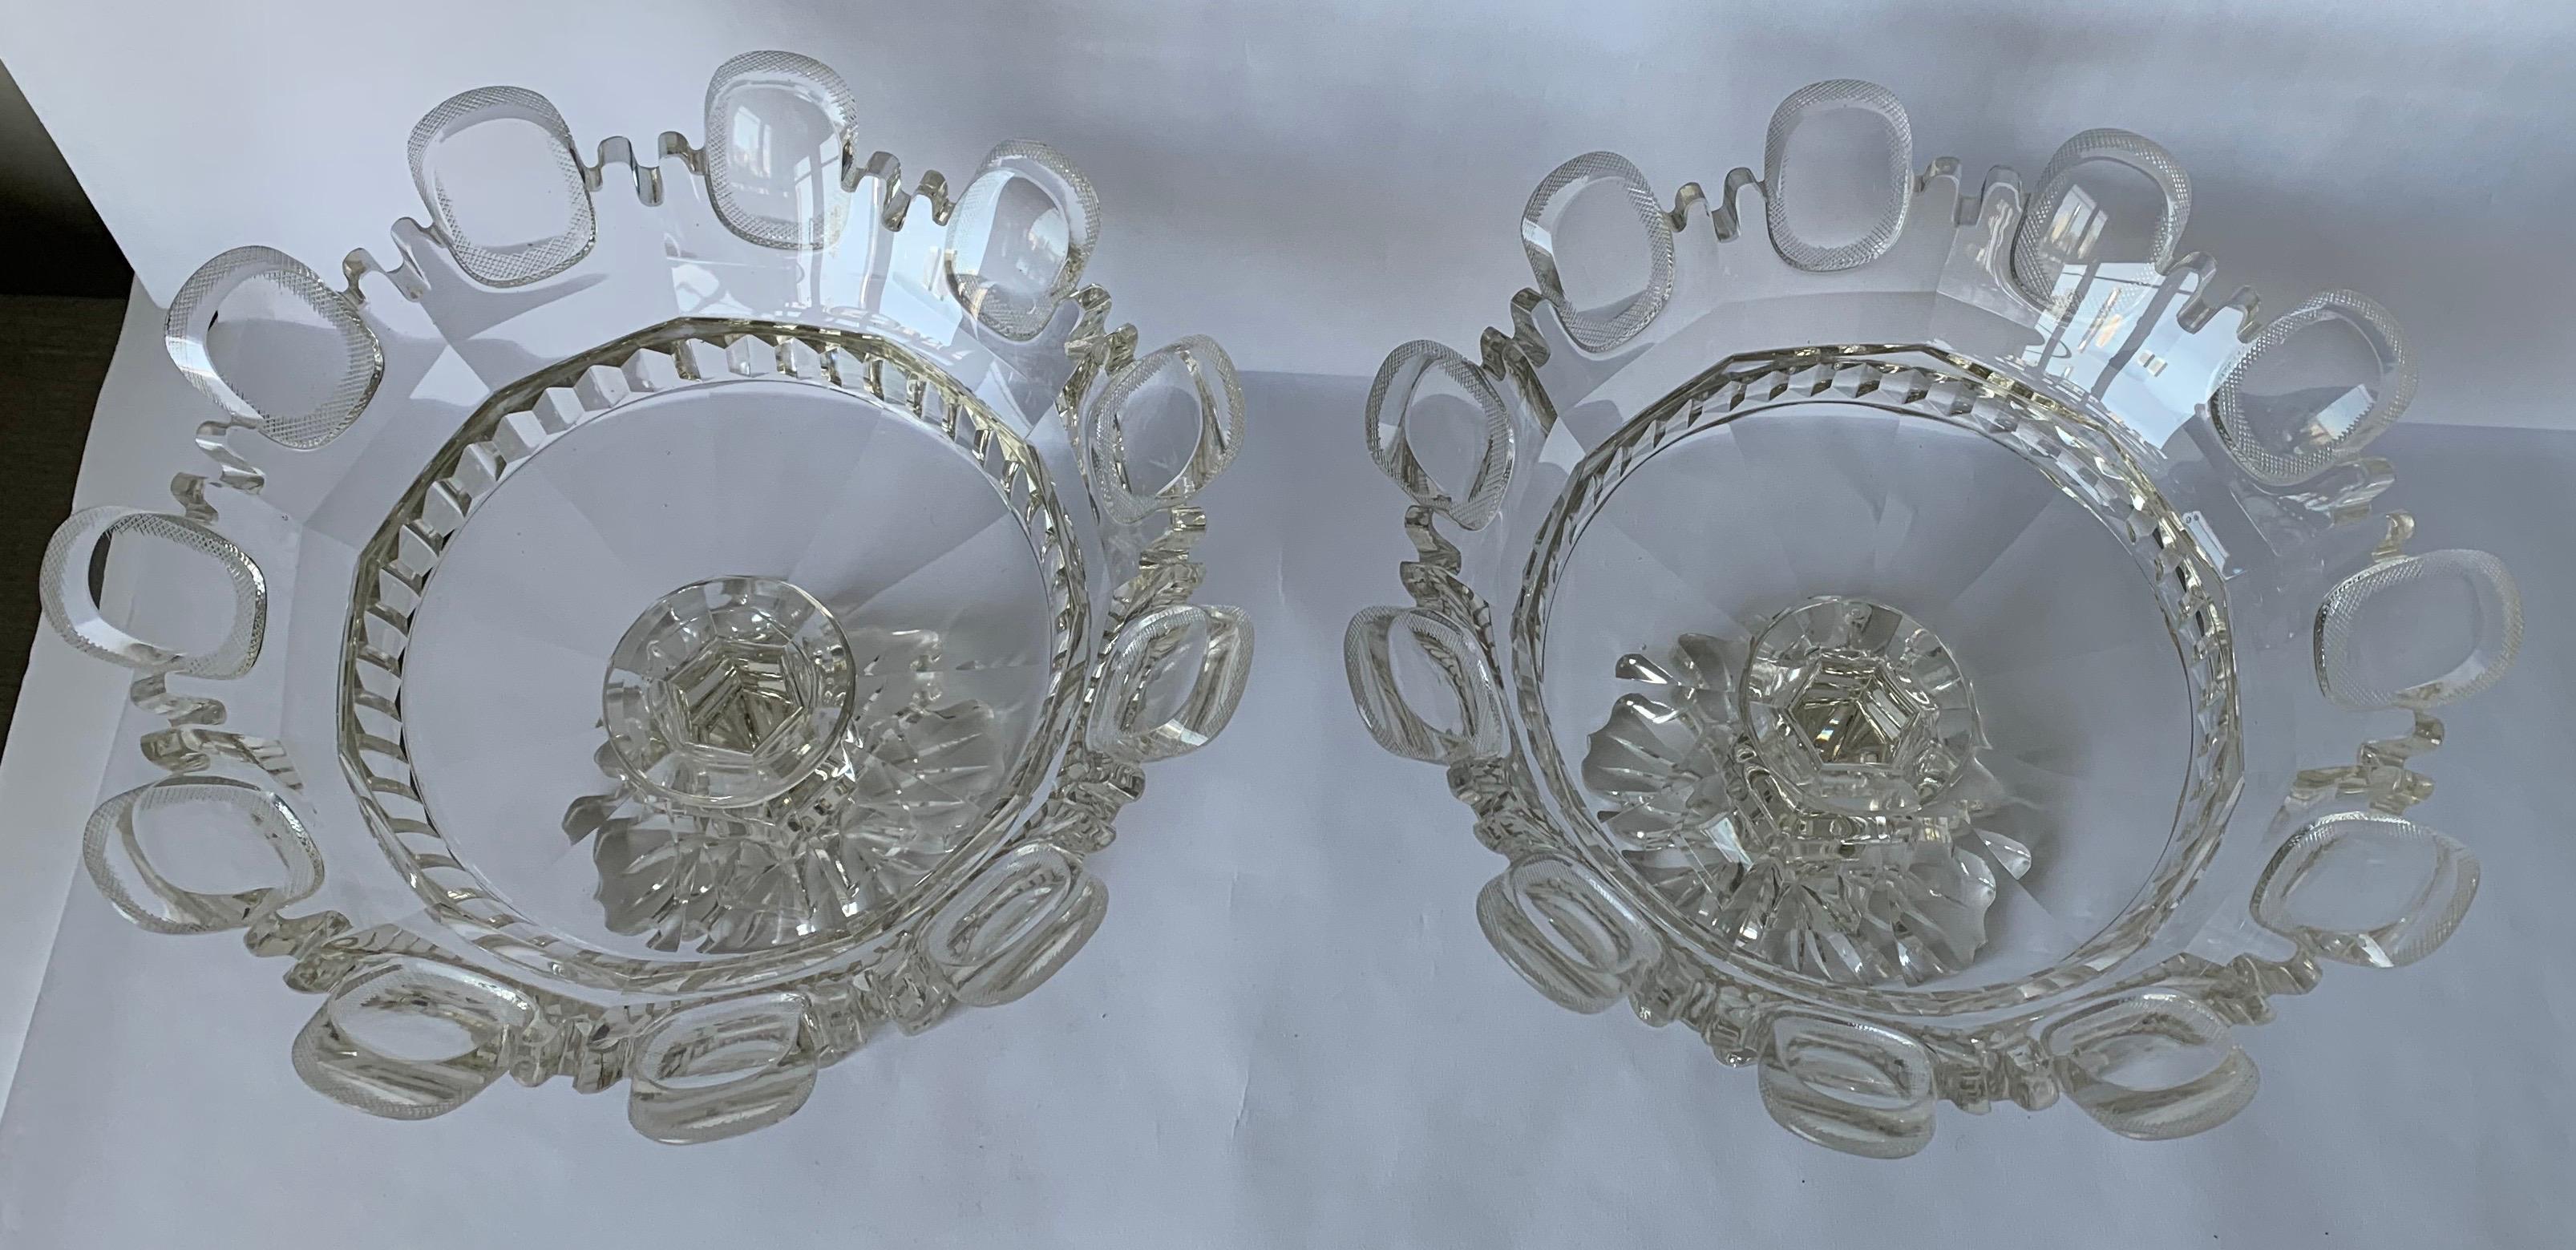 Irish Pair of 1820s Cut Crystal Mantle Vases For Sale